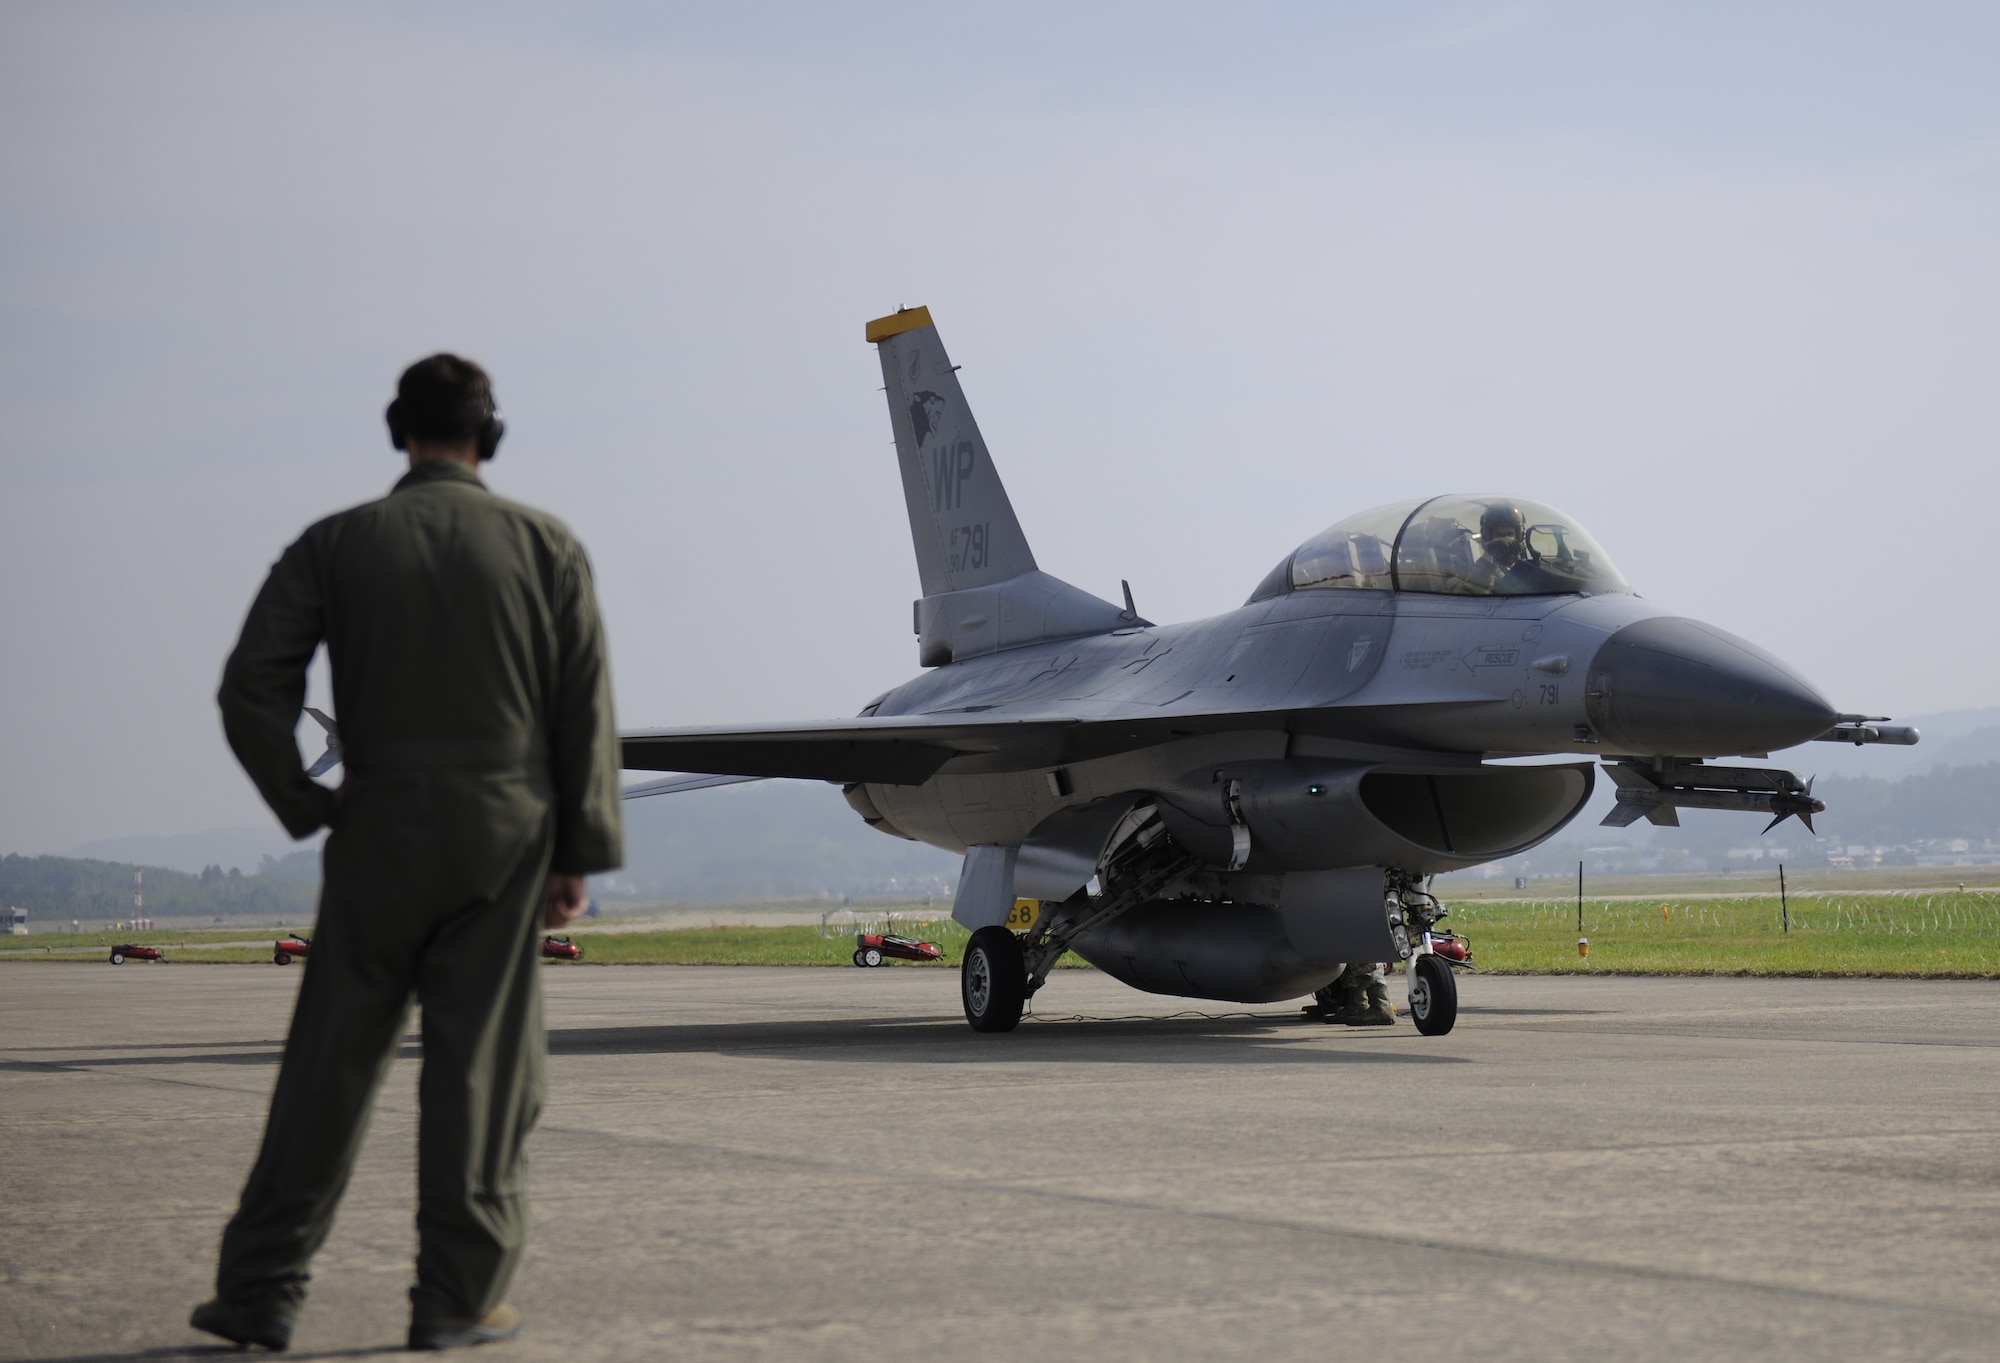 Capt. Matthew Alexander, 80th Fighter Squadron pilot, prepares his F-16 Fighting Falcon for a tow after landing at the Sacheon Airshow at Sacheon Base, Republic of Korea, Oct. 20, 2016. 7th Air Force provided both an F-16 and A-10 Thunderbolt II static display for the four-day airshow, showcasing U.S. Air Force capabilities to over 260,000 attendees. (U.S. Air Force photo by 1st Lt. Lauren Linscott/Released)